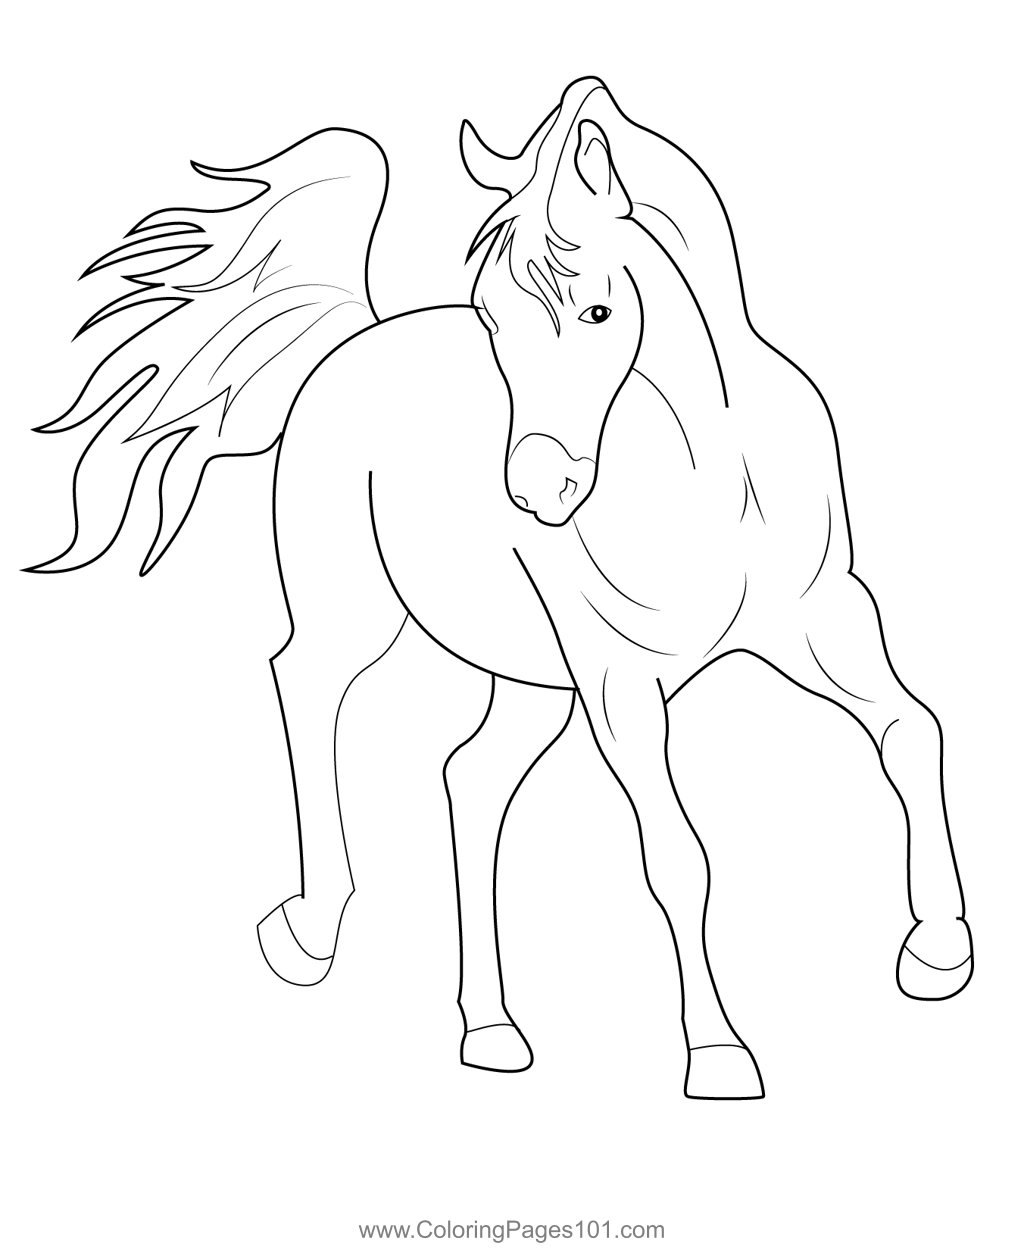 Horseland Azte Coloring Page for Kids - Free Horseland Printable ...